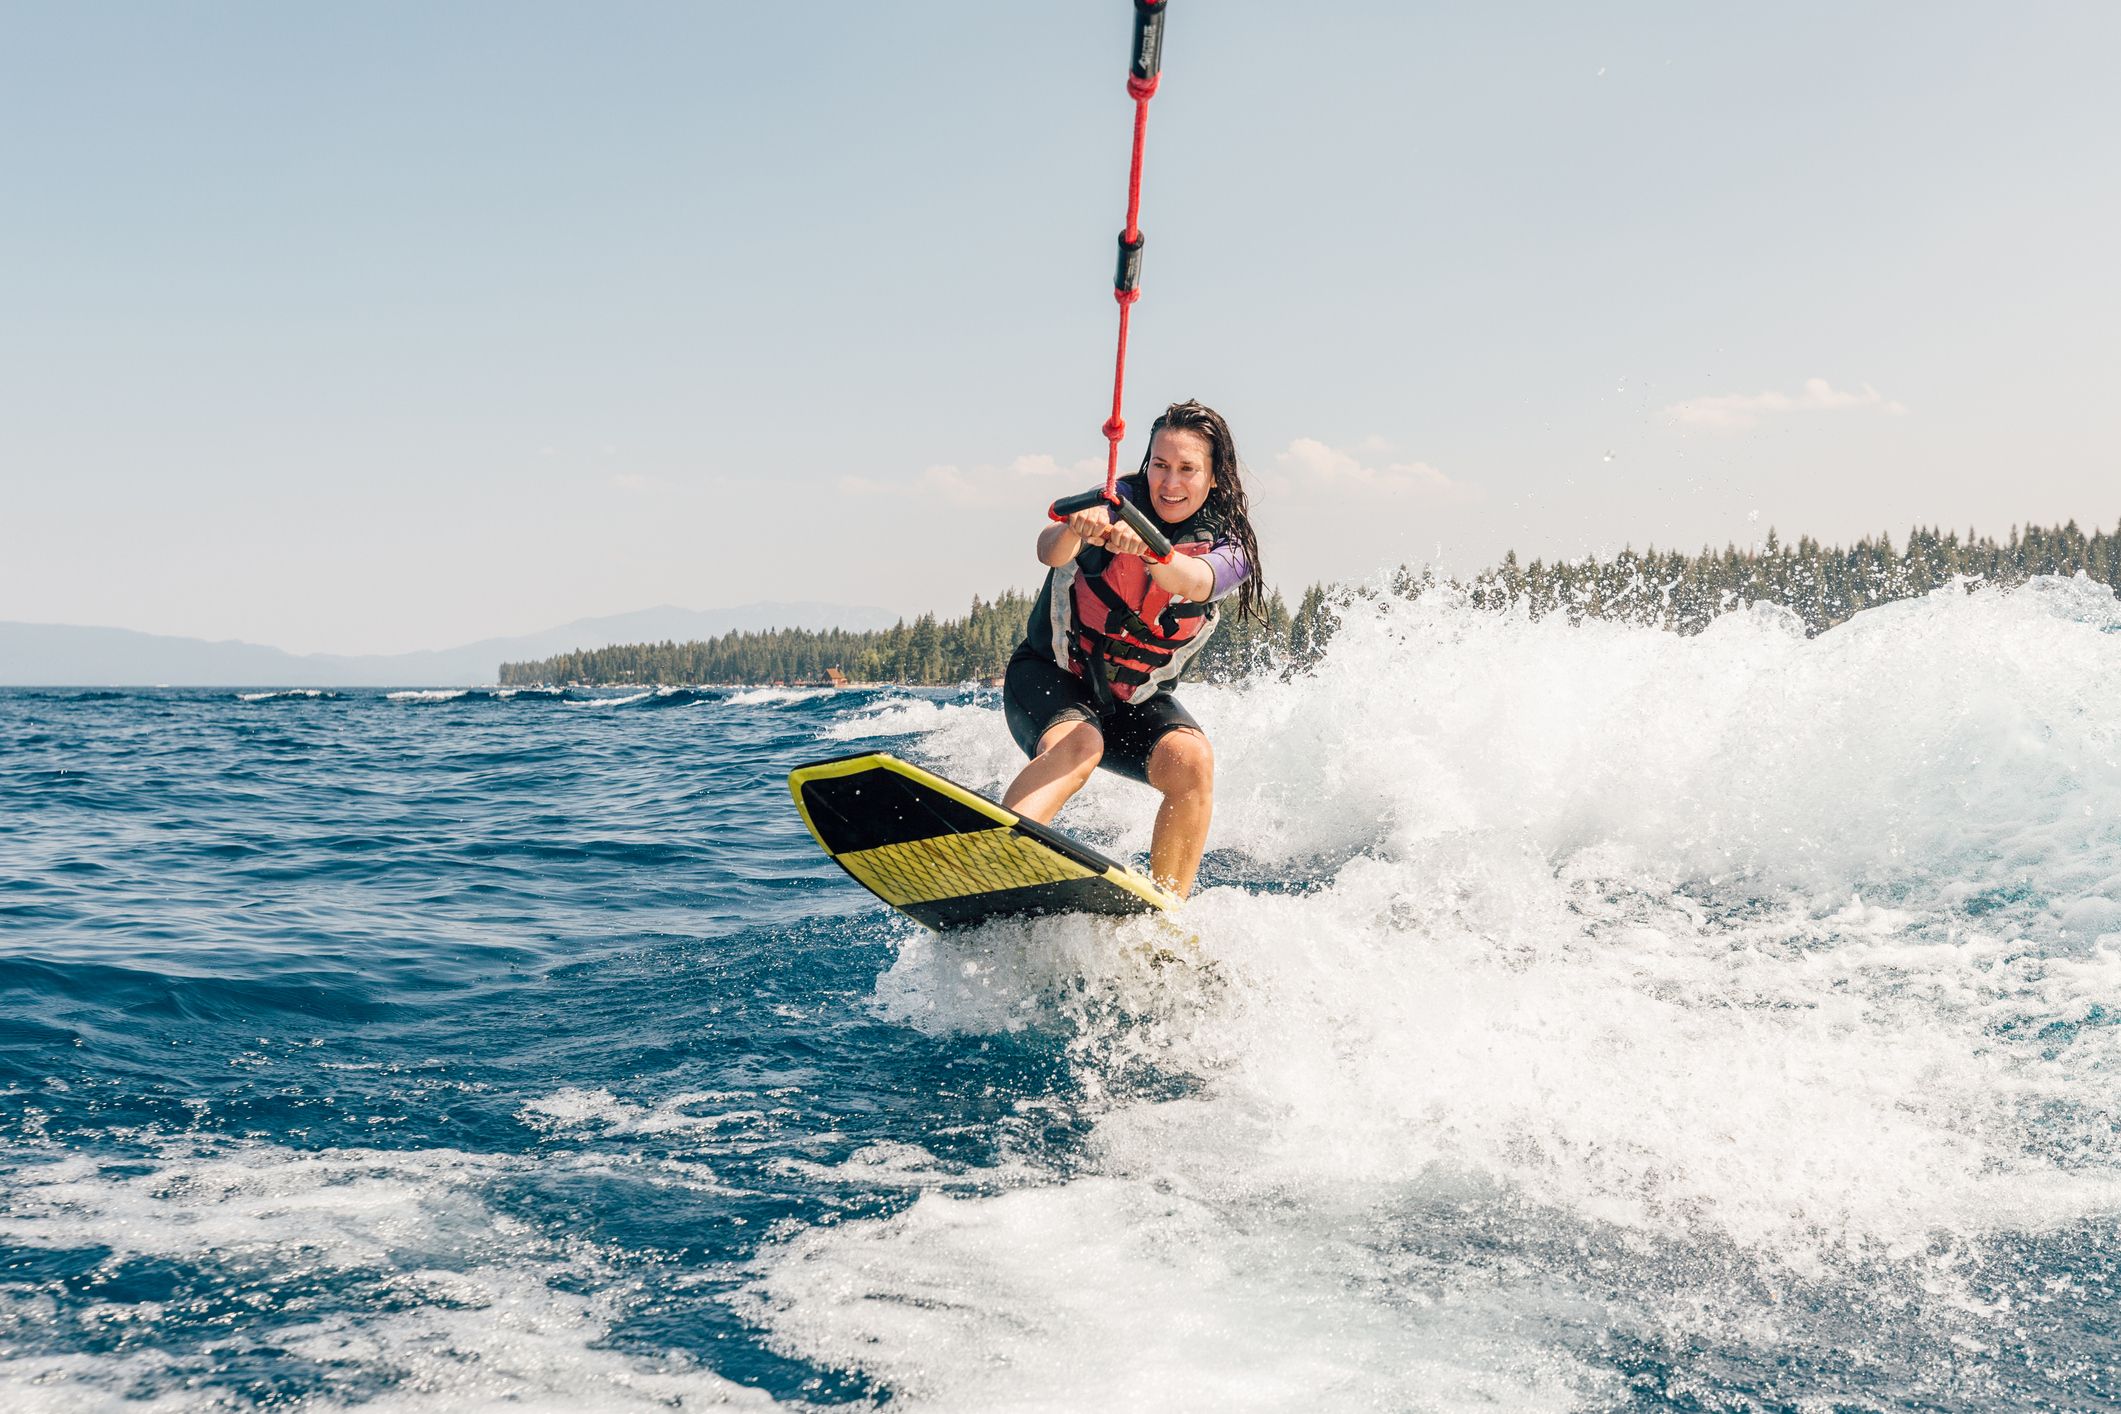 https://hips.hearstapps.com/hmg-prod/images/woman-wakeboarding-at-lake-royalty-free-image-1687469861.jpg